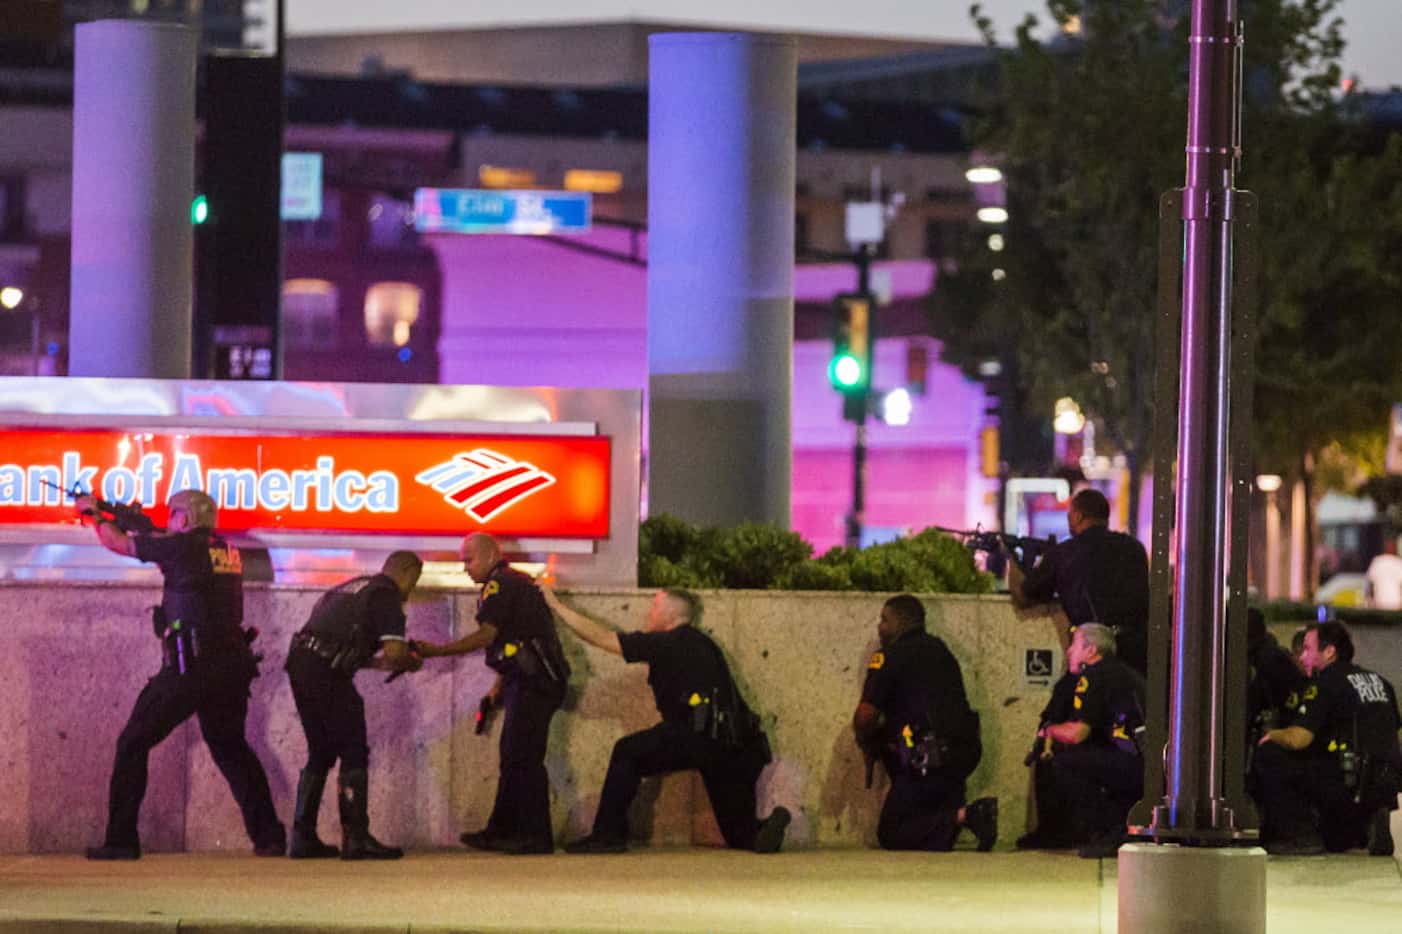  Dallas Police respond after shots were fired at a Black Lives Matter rally in downtown...